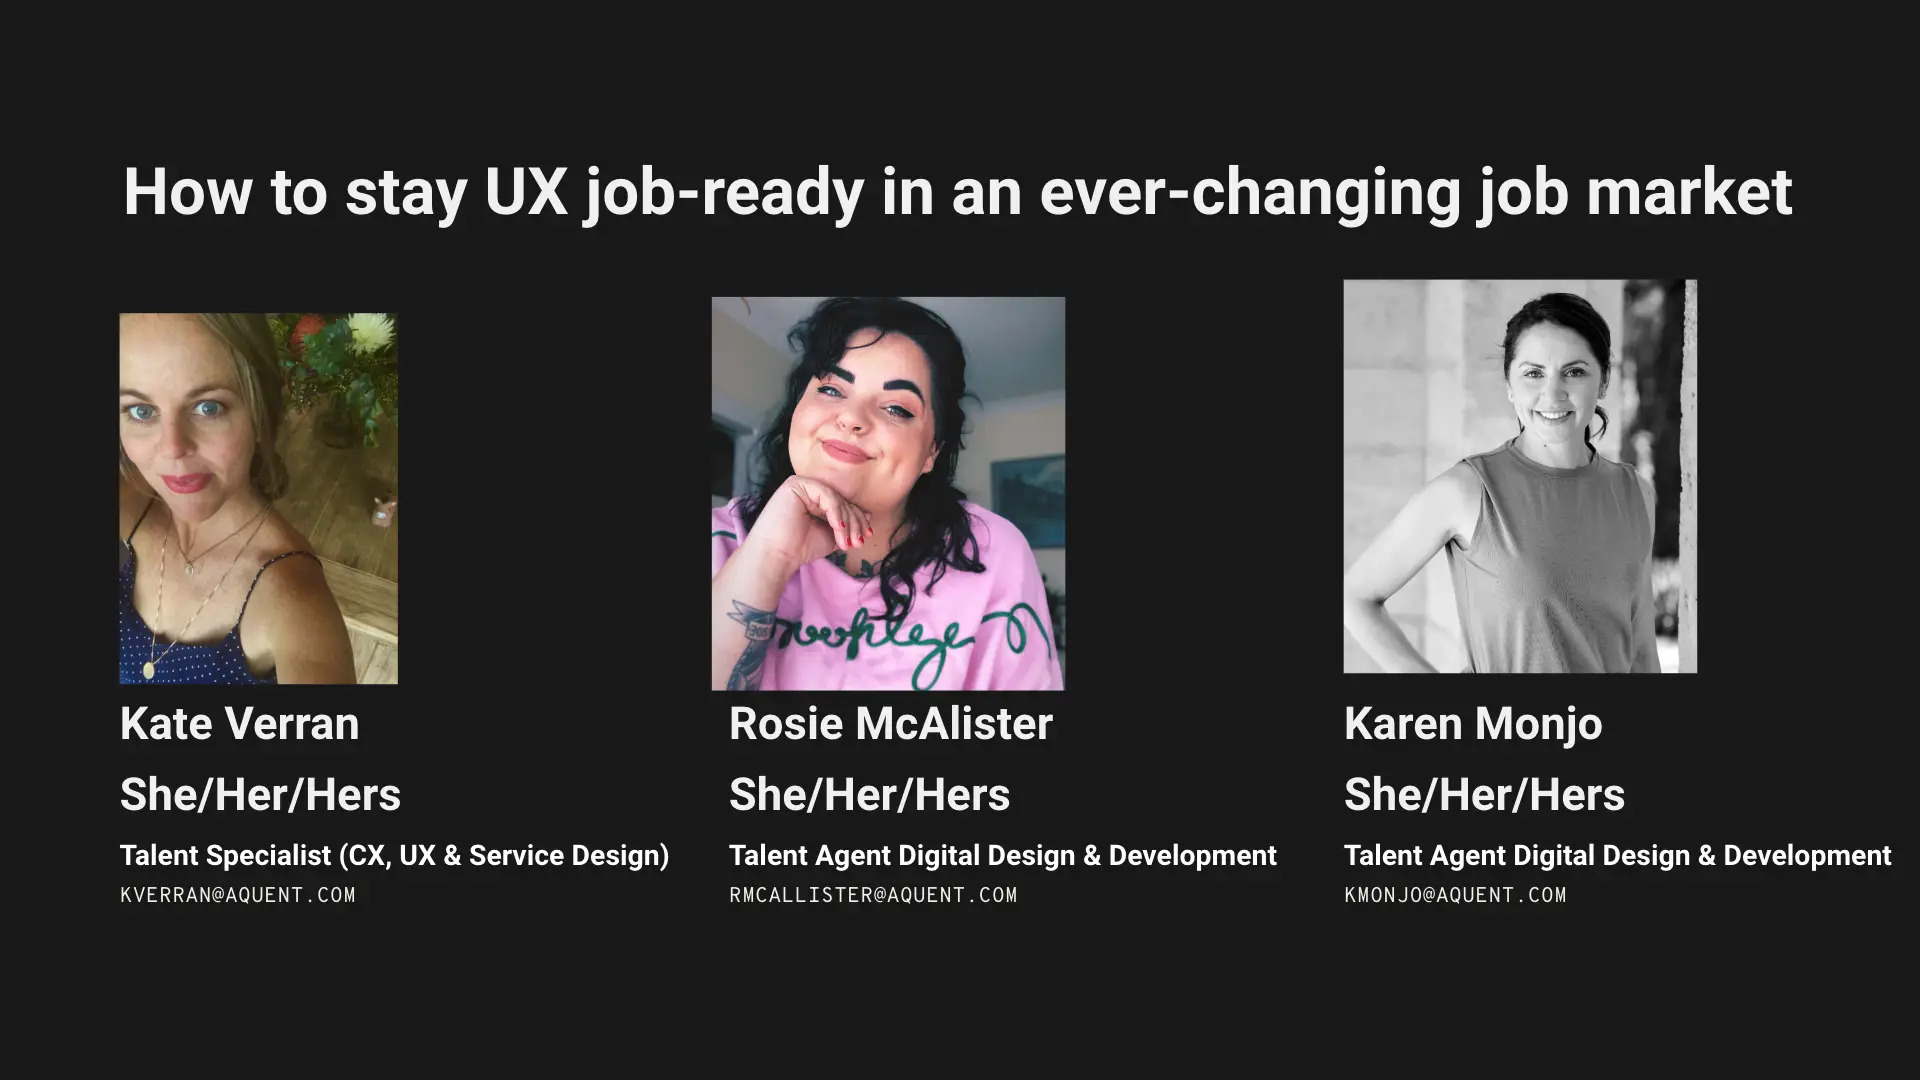 How To Stay UX Job-Ready In An Ever-Changing Job Market